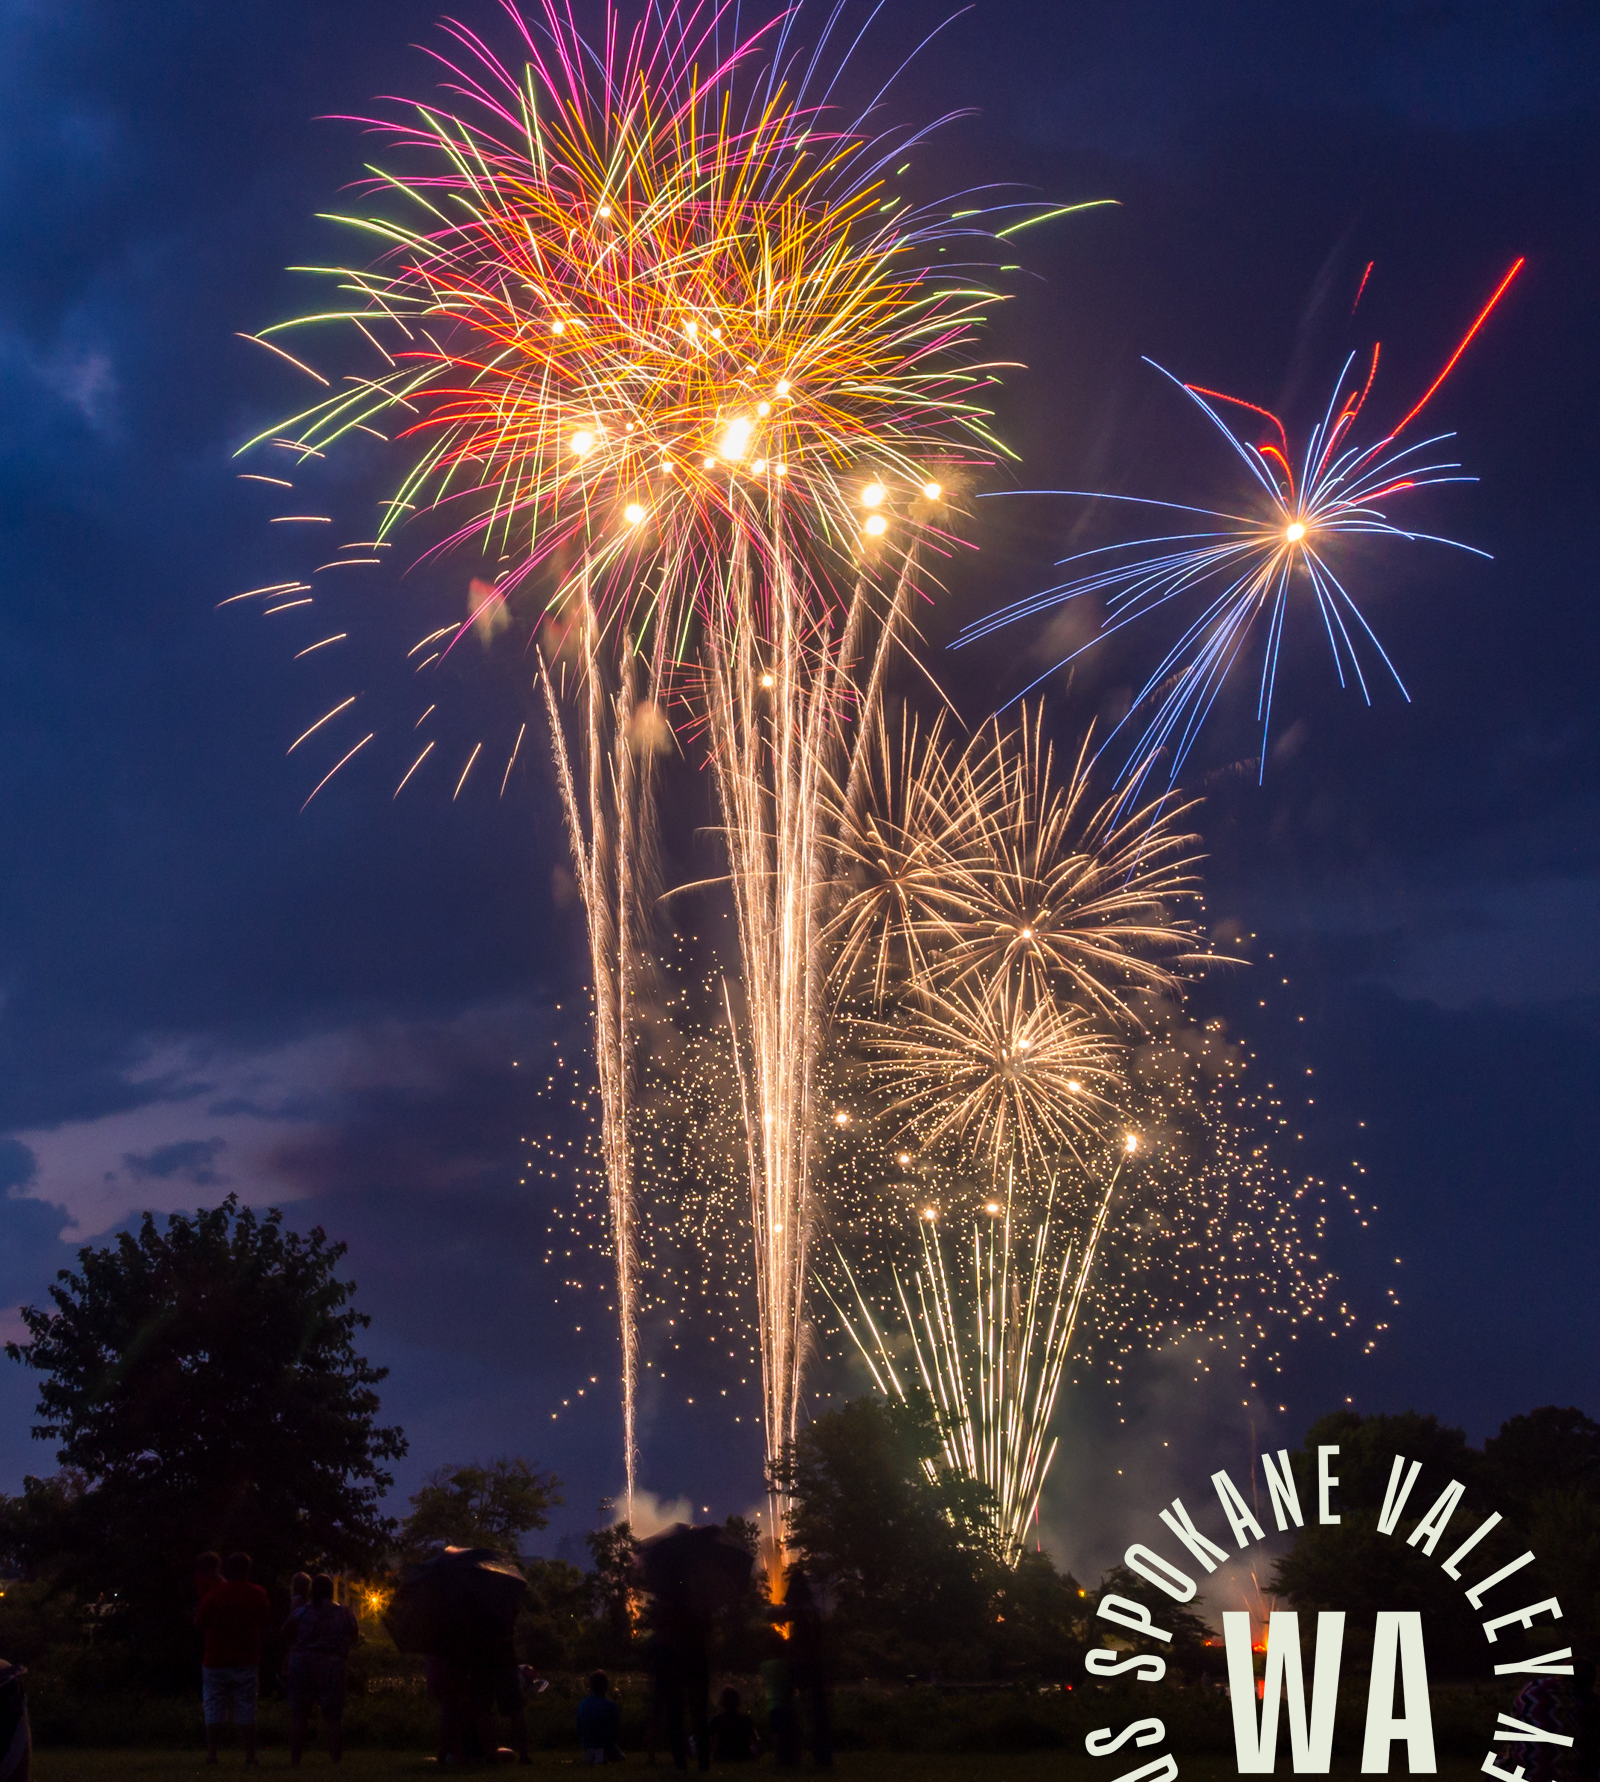 CELEBRATE WITH A BANG: YOUR GUIDE TO THE BEST FIREWORKS IN AND NEAR SPOKANE VALLEY